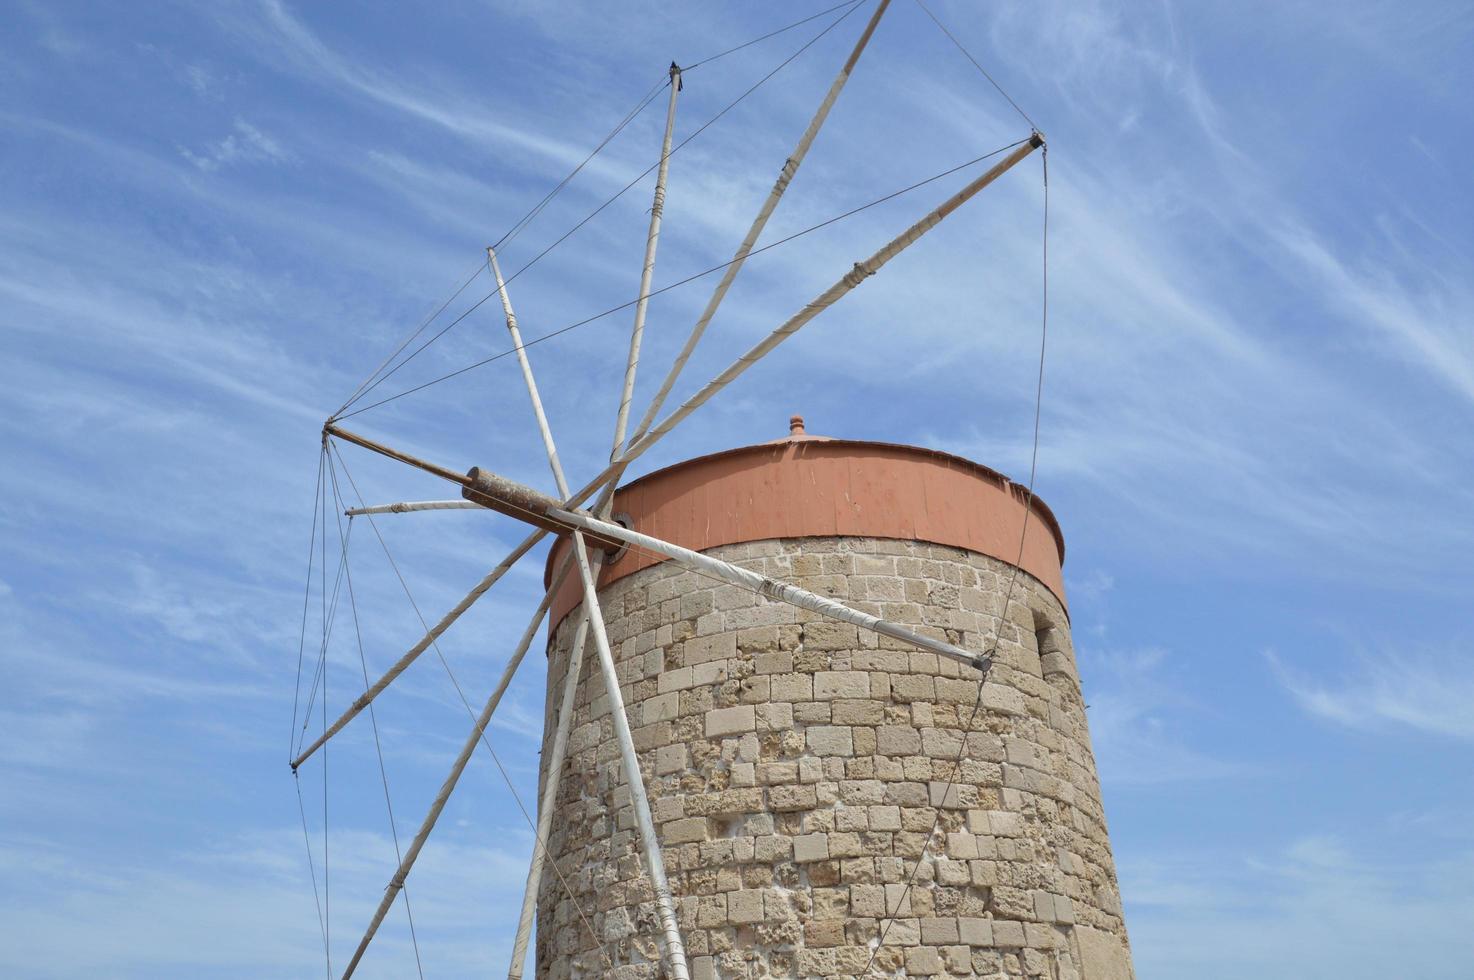 Rhodes Town Windmills in the port city, Greece photo